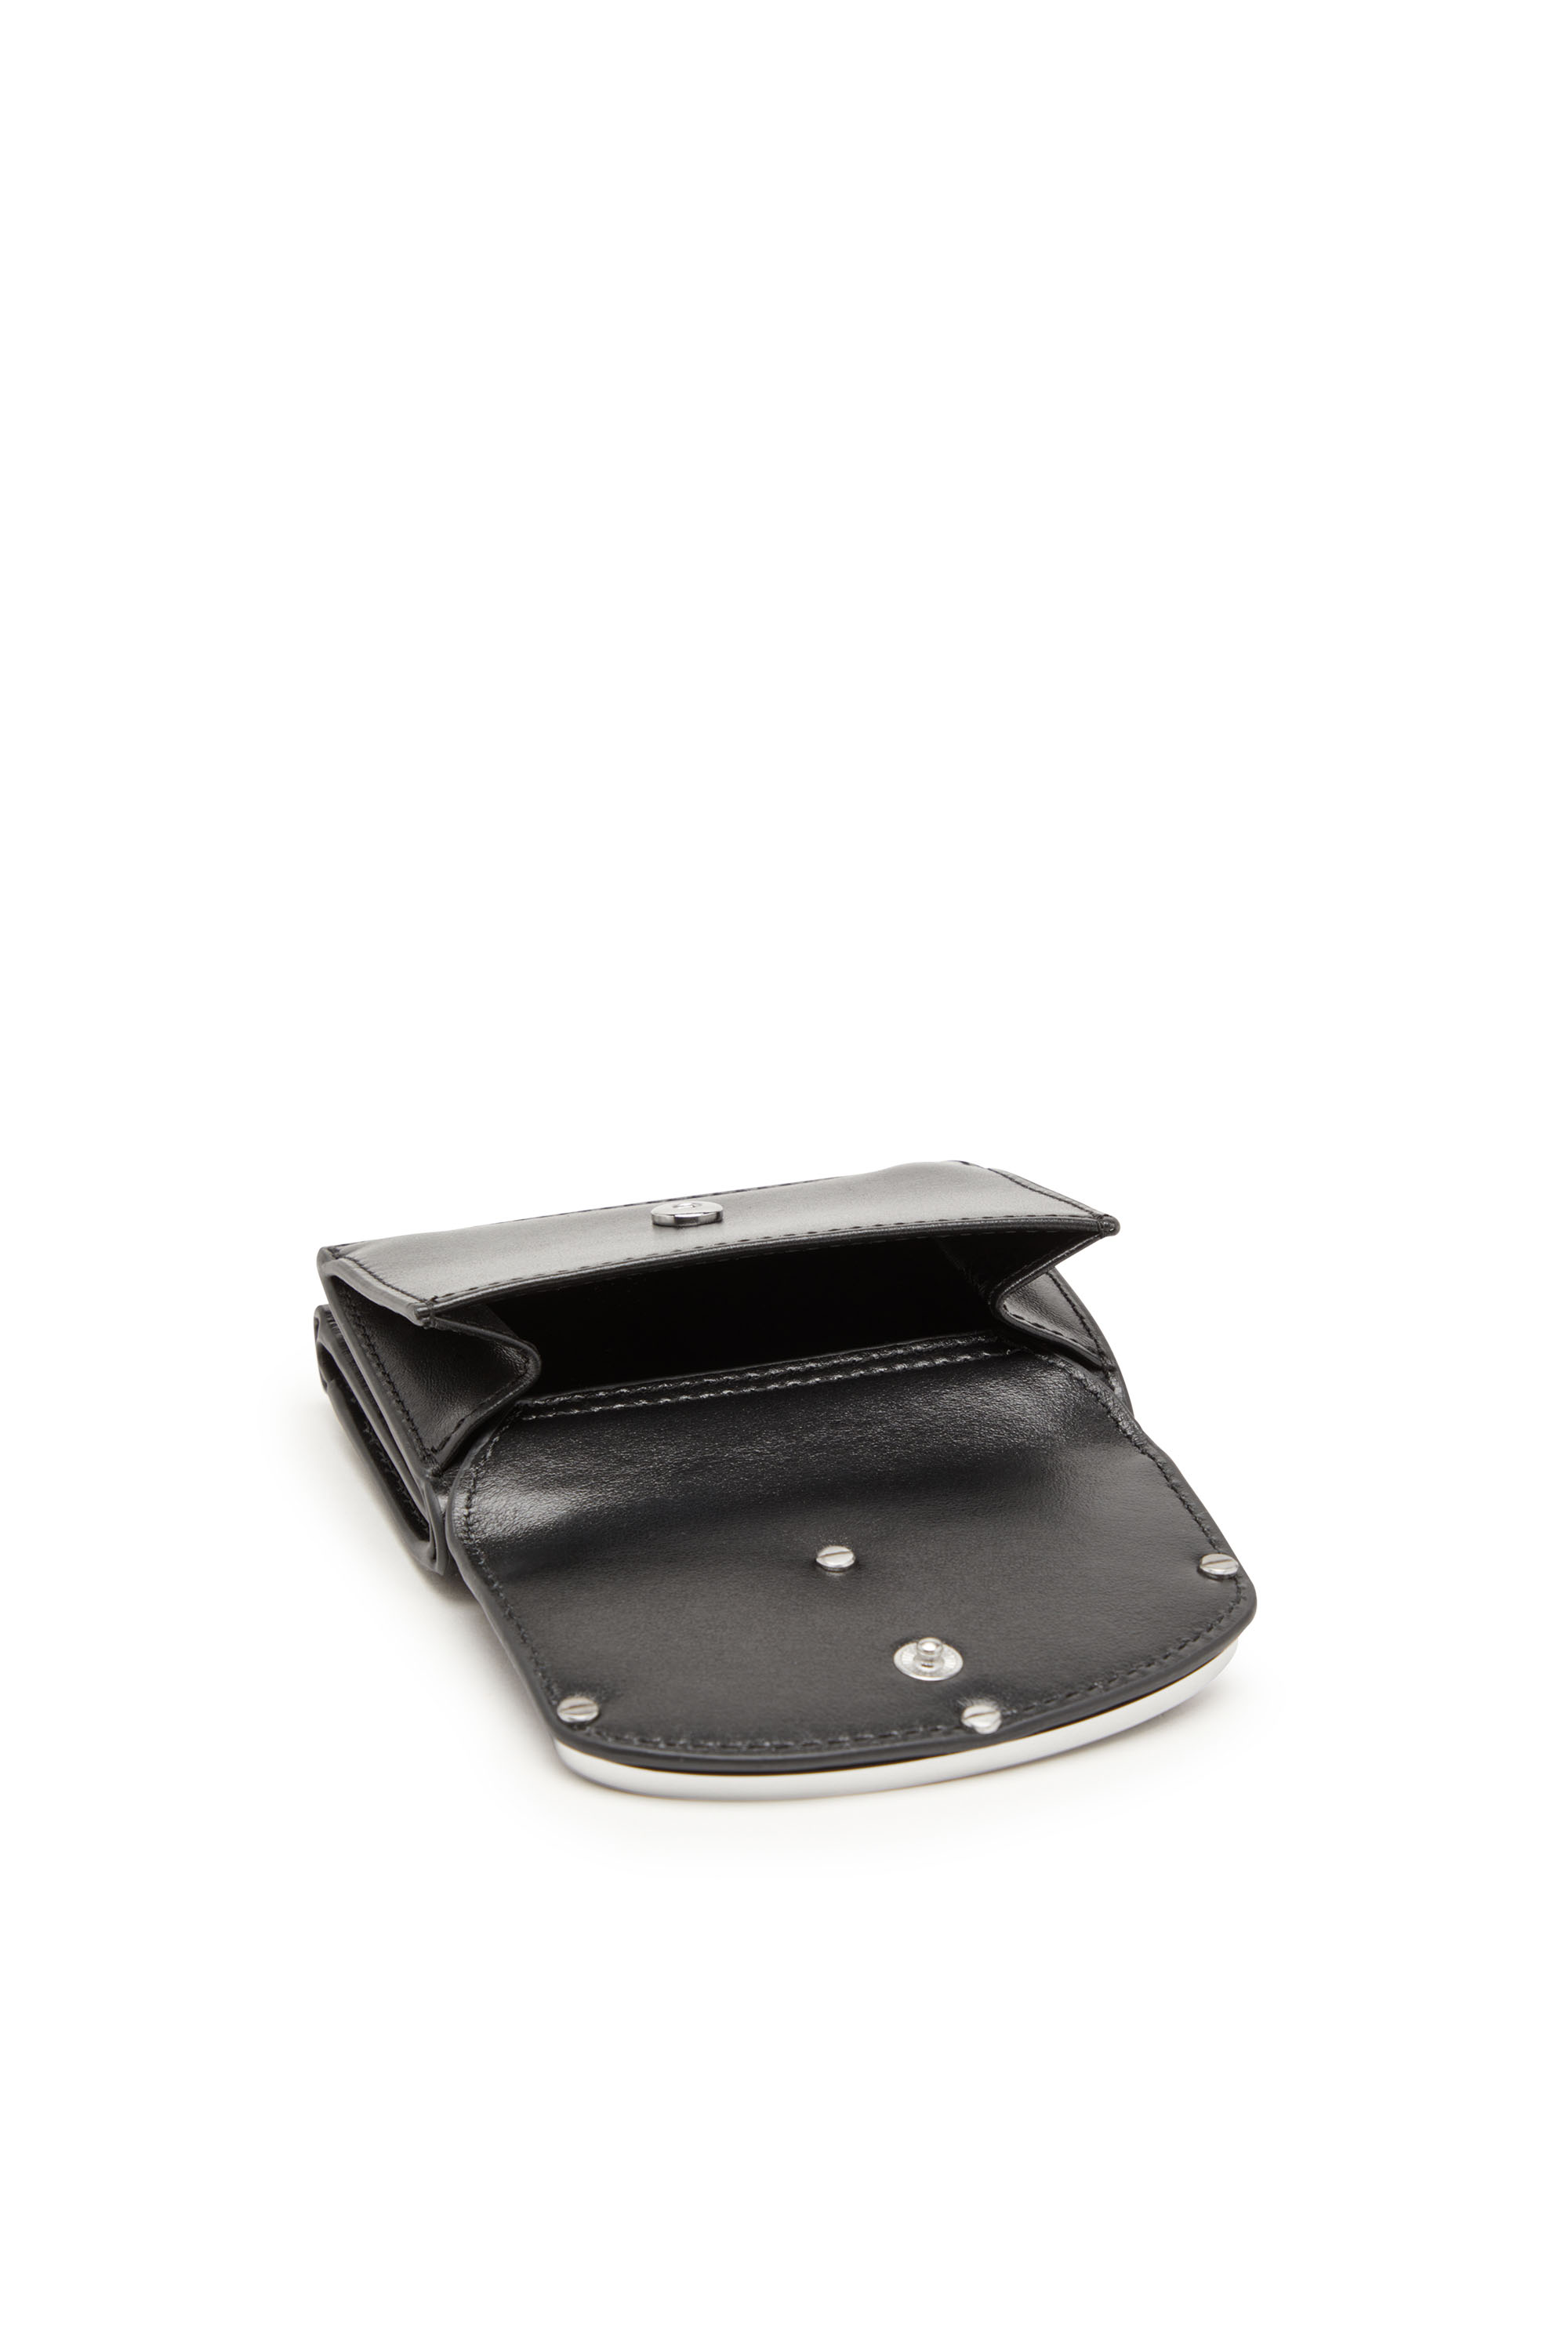 Diesel - 1DR TRI FOLD COIN XS II, Female Tri-fold wallet in leather in ブラック - Image 4